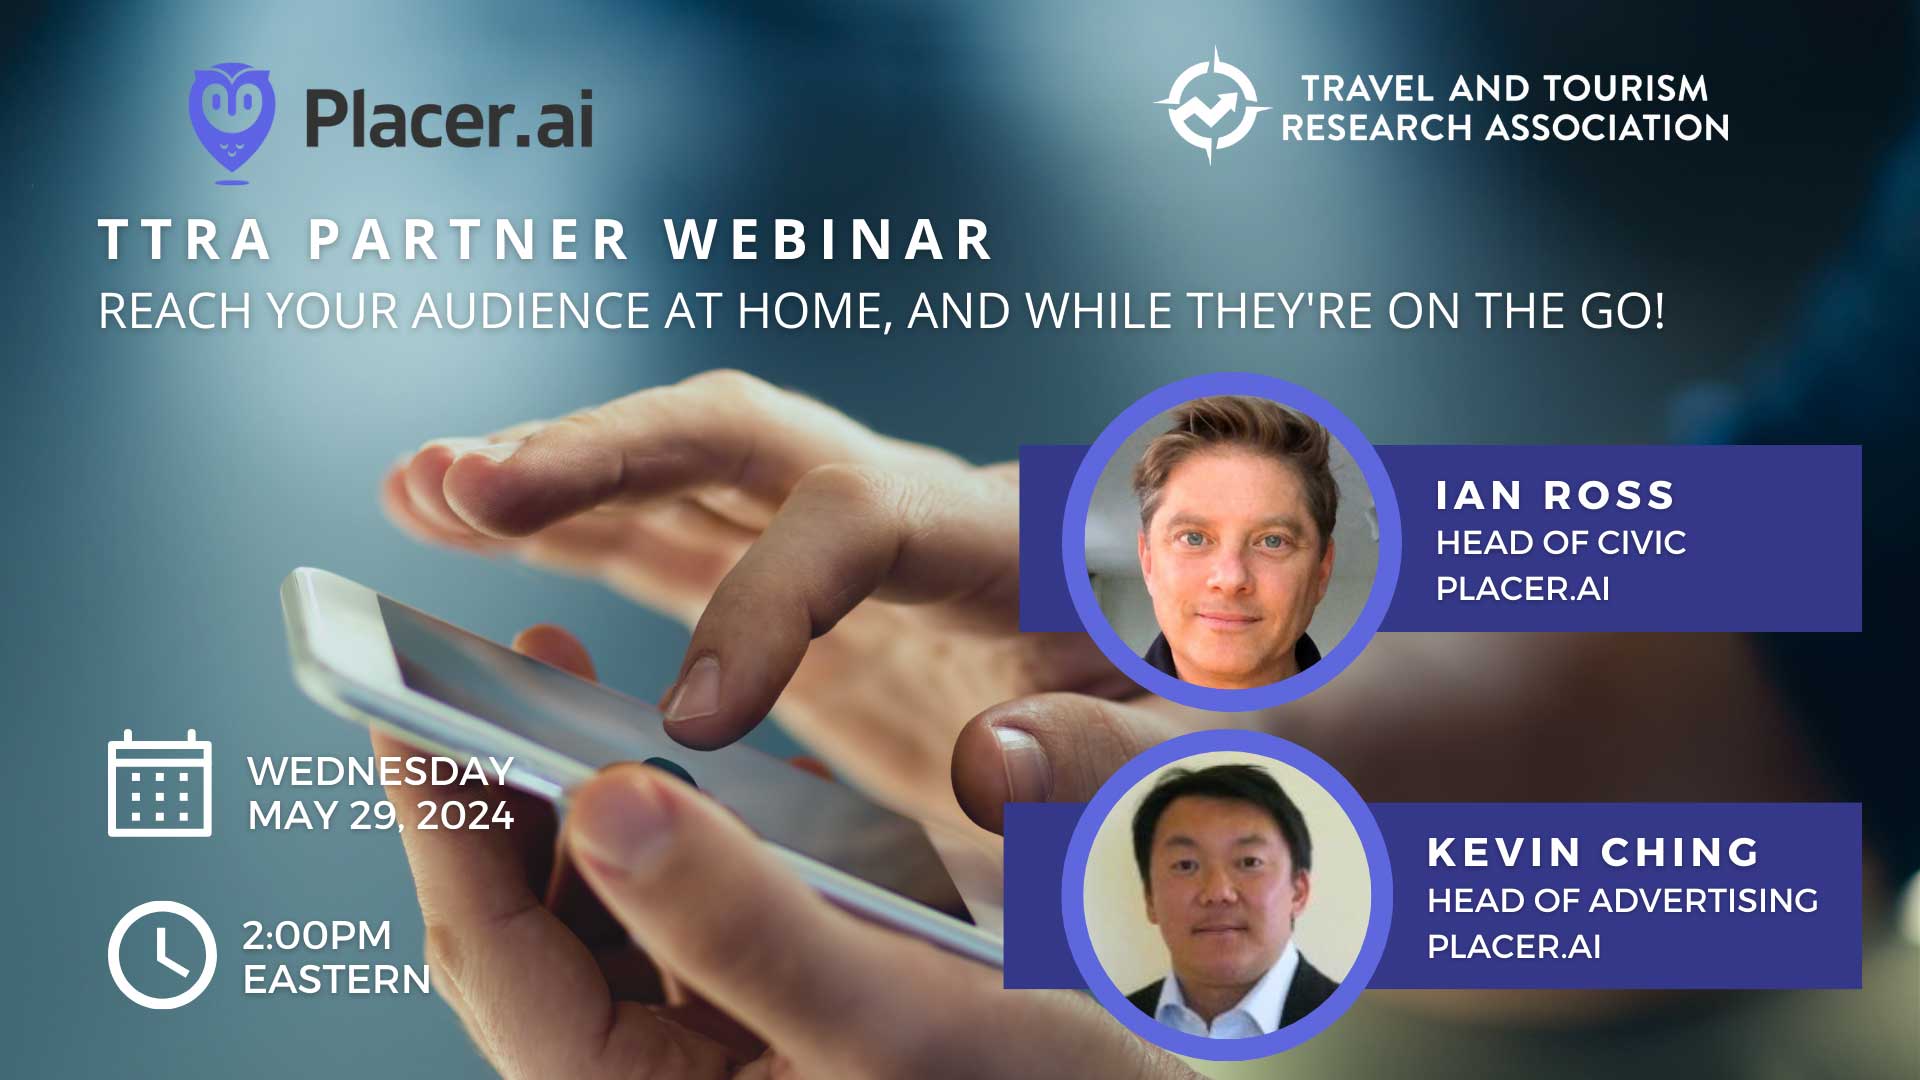 TTRA Partner webinar with Placer.ai